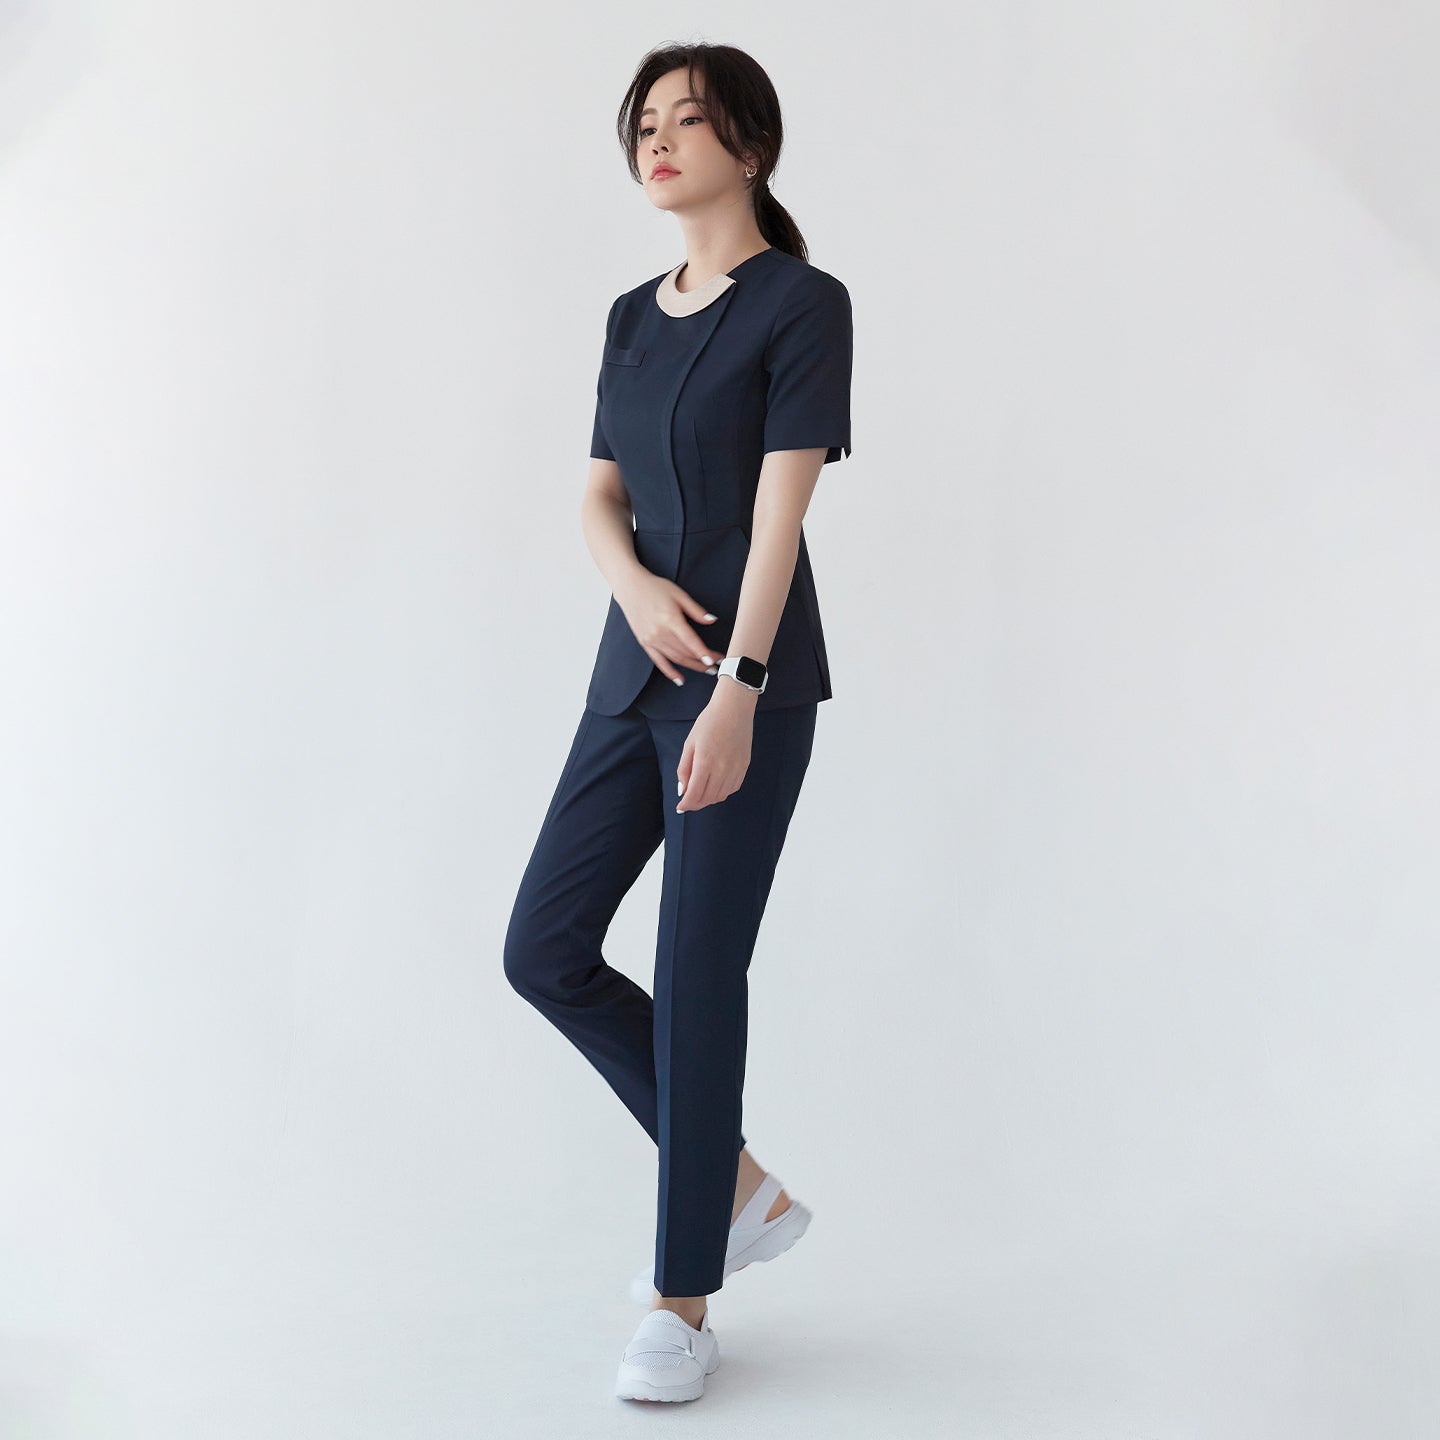 A woman in a navy round-neck front zipper top and matching pants, standing with a hand on her stomach. She wears white shoes and a smartwatch,Navy